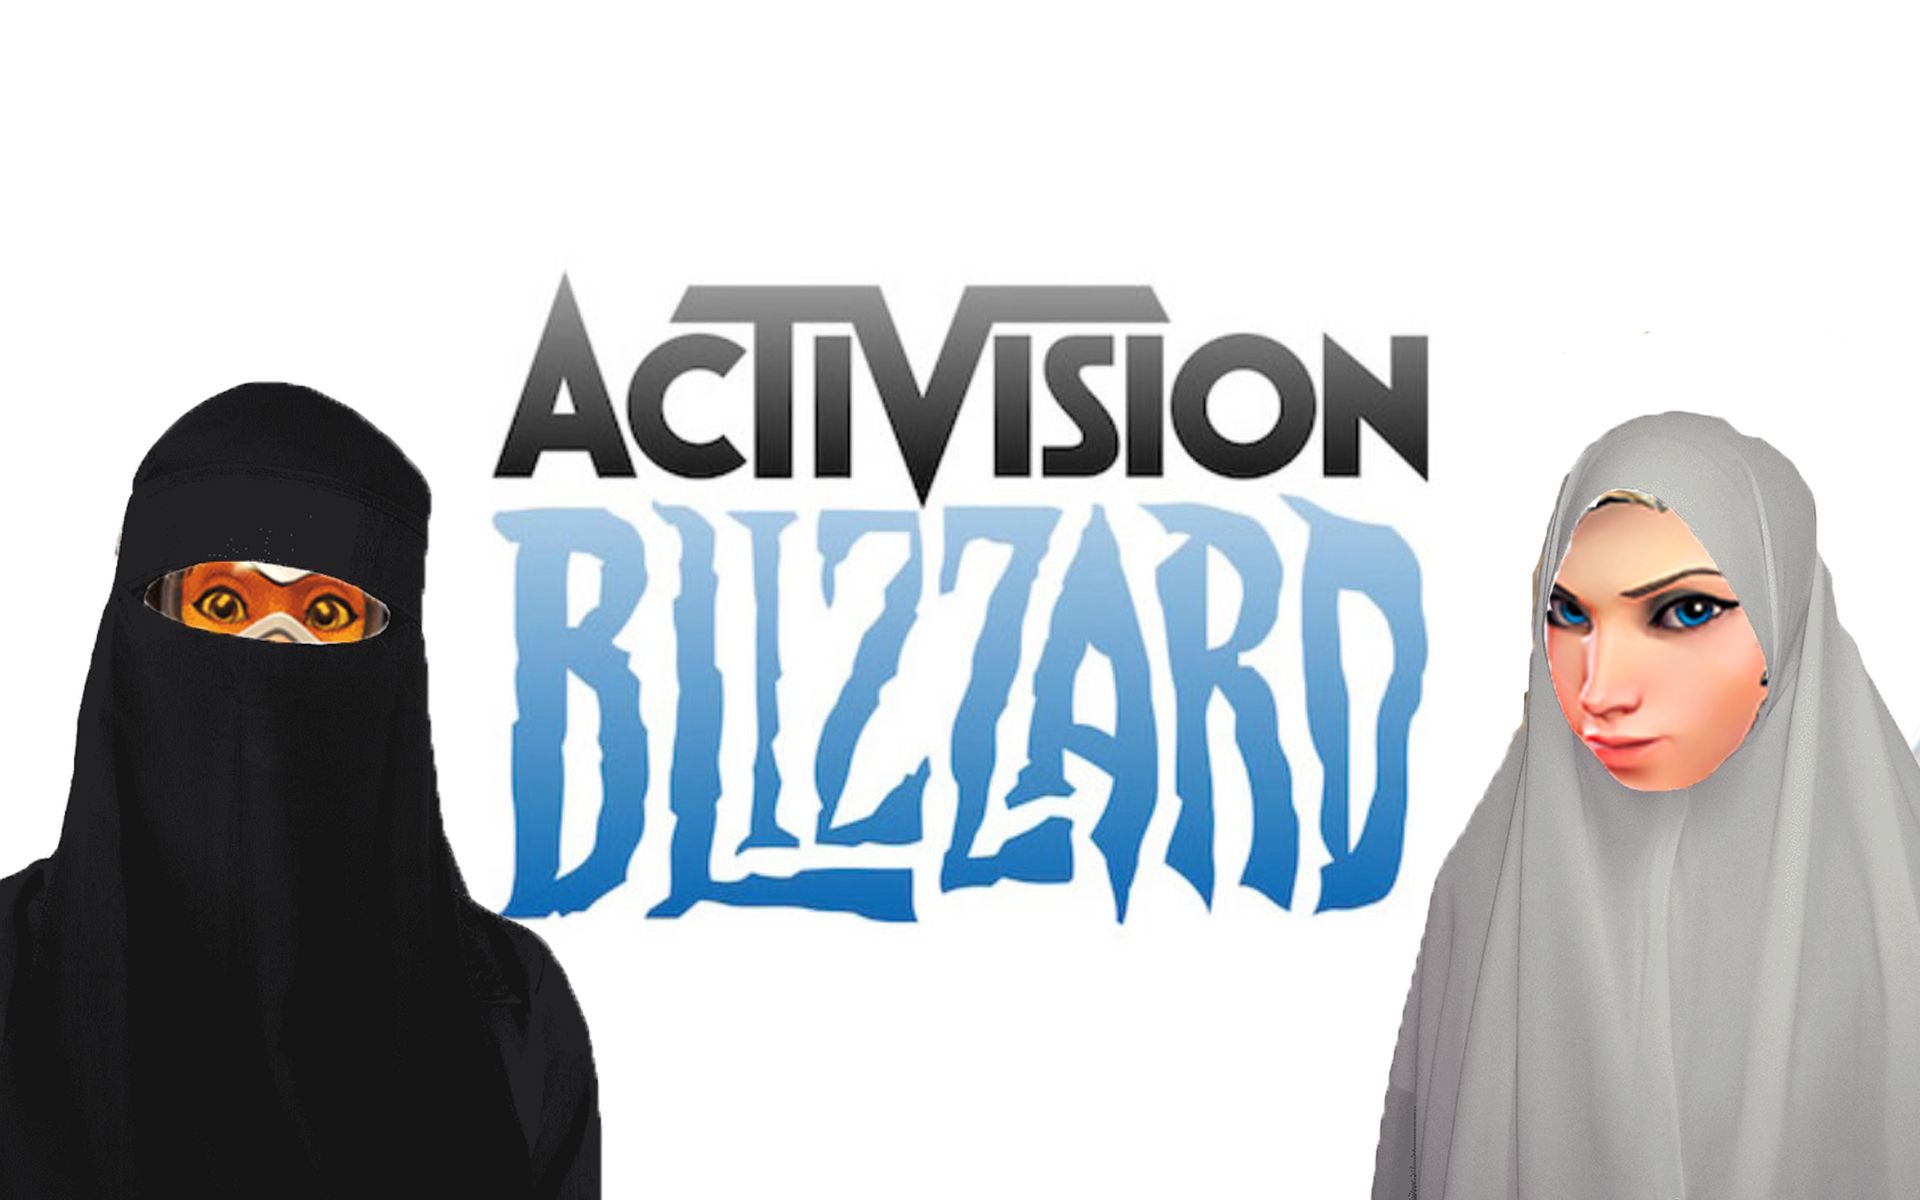 Female Activision Blizzard Employees Must Now Wear Head Covering To Prevent Harassment